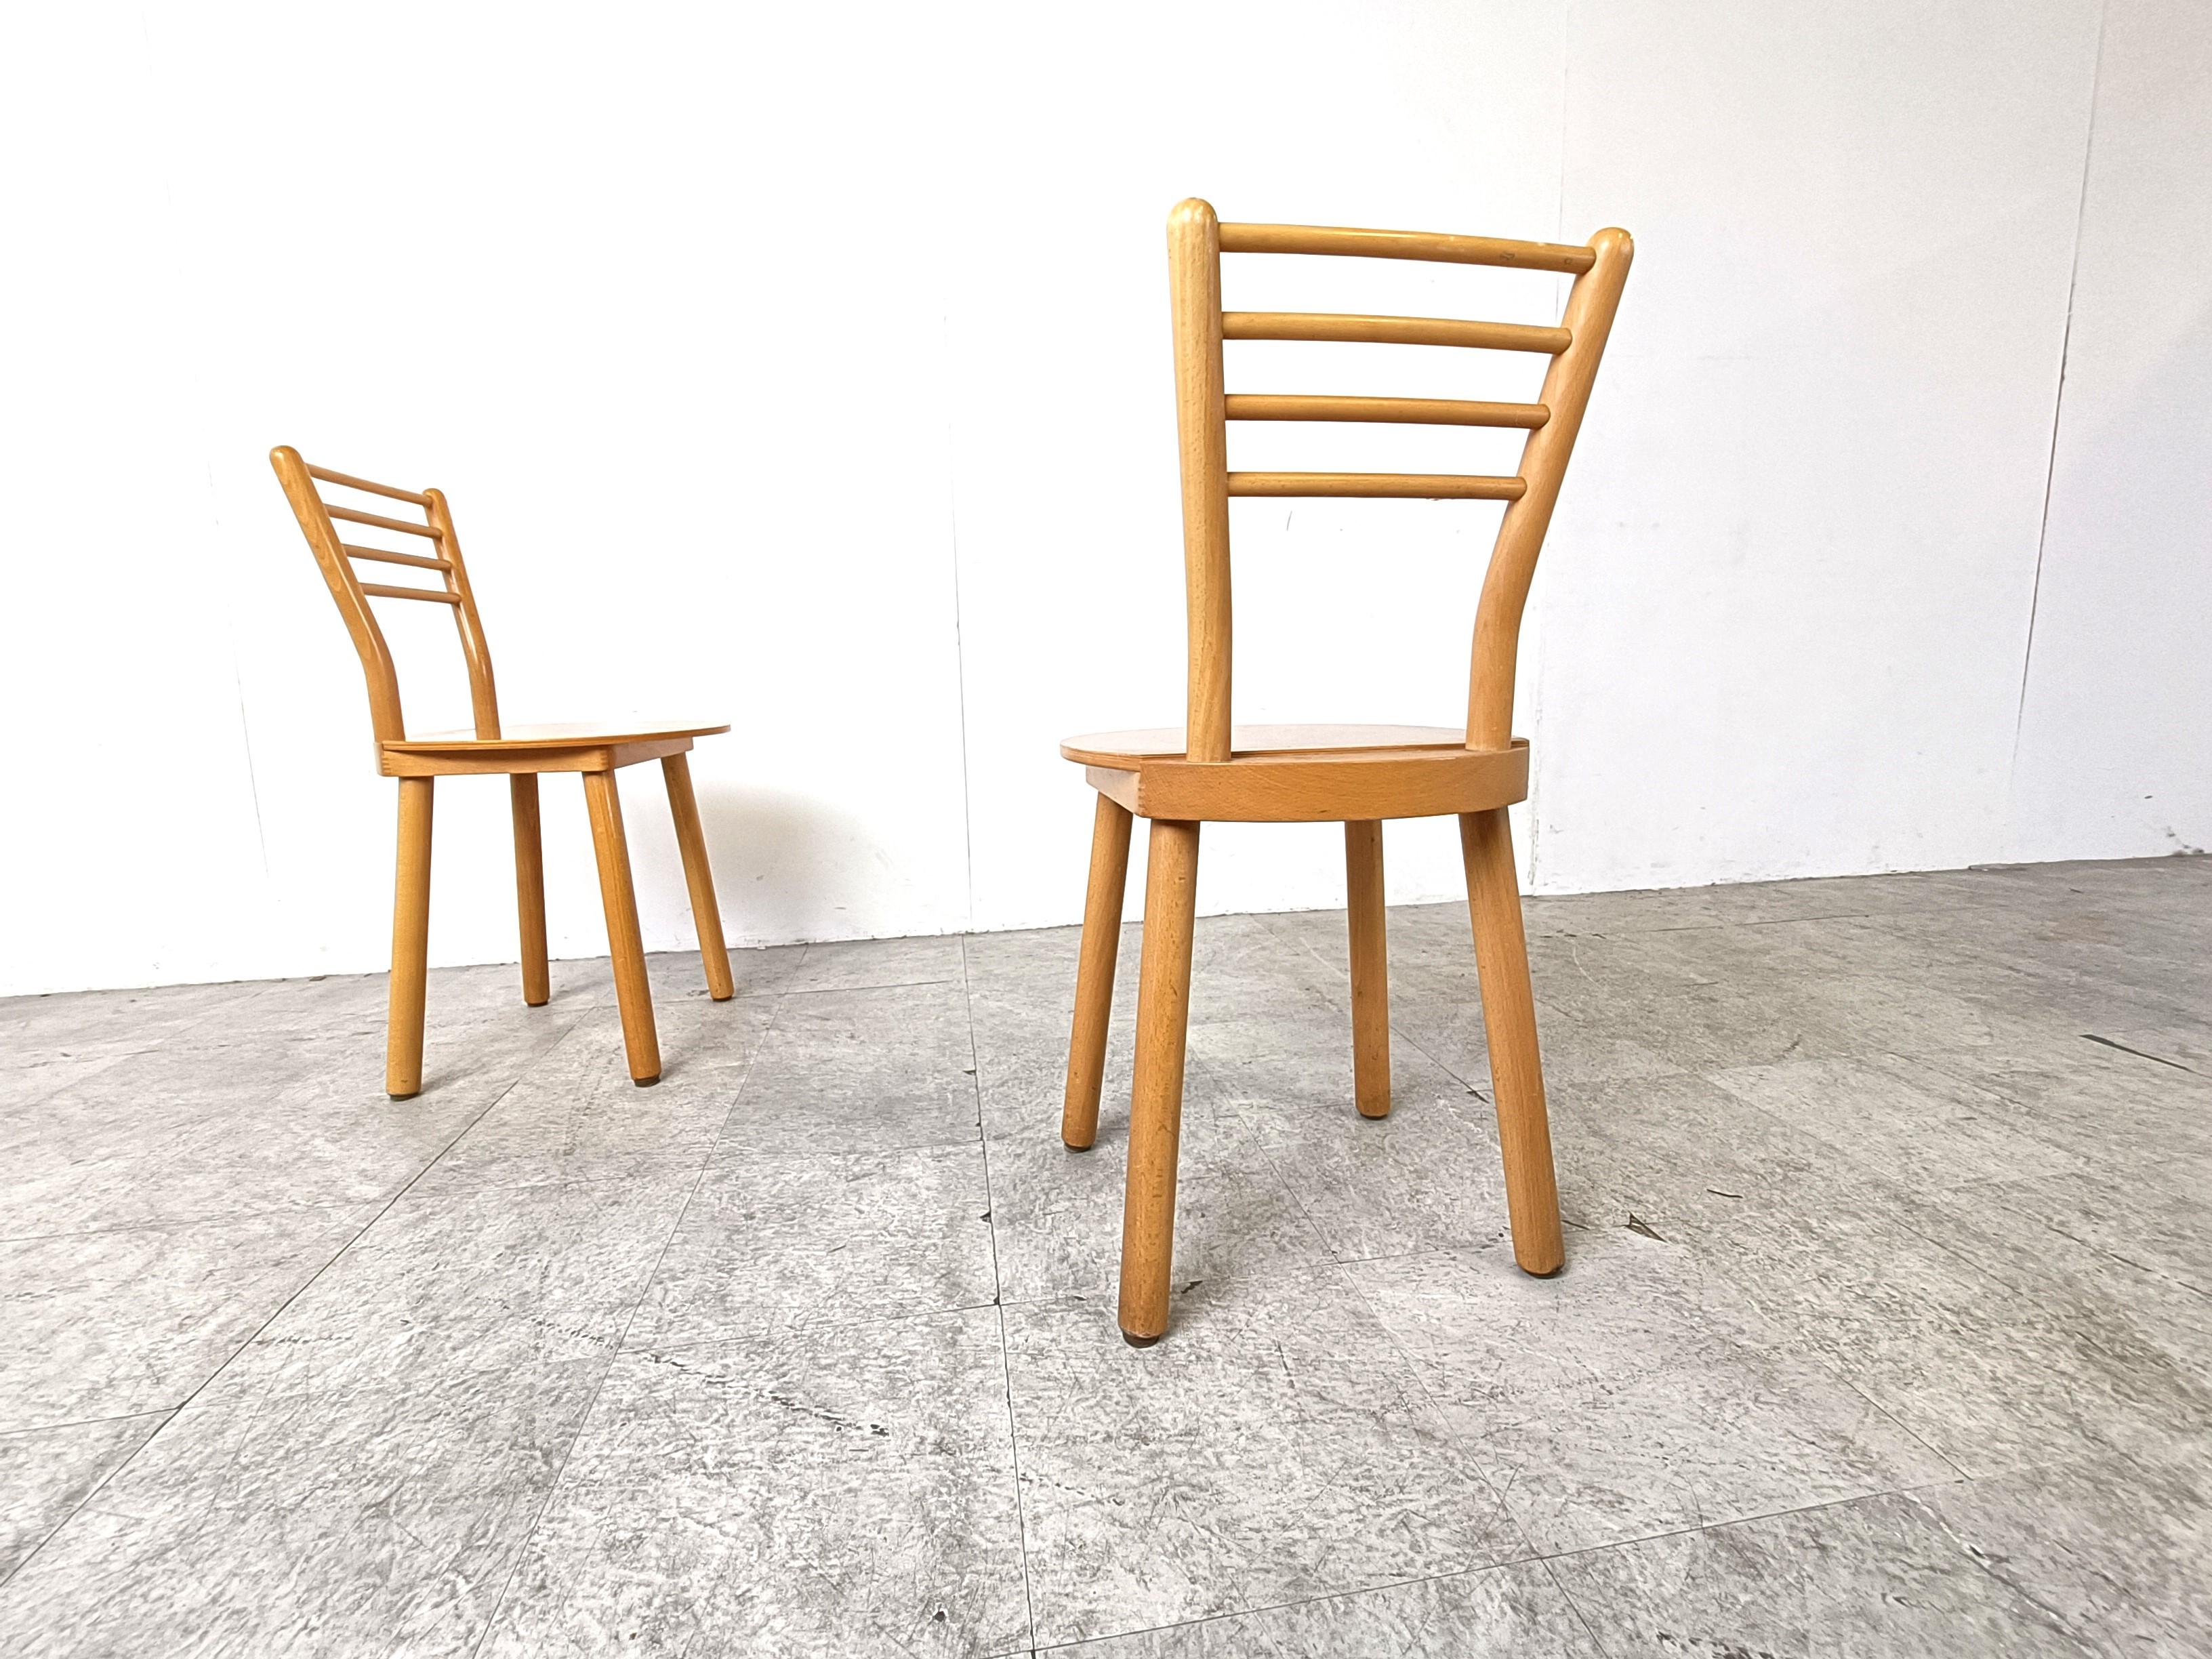 Vintage scandinavian dining chairs, 1970s For Sale 2